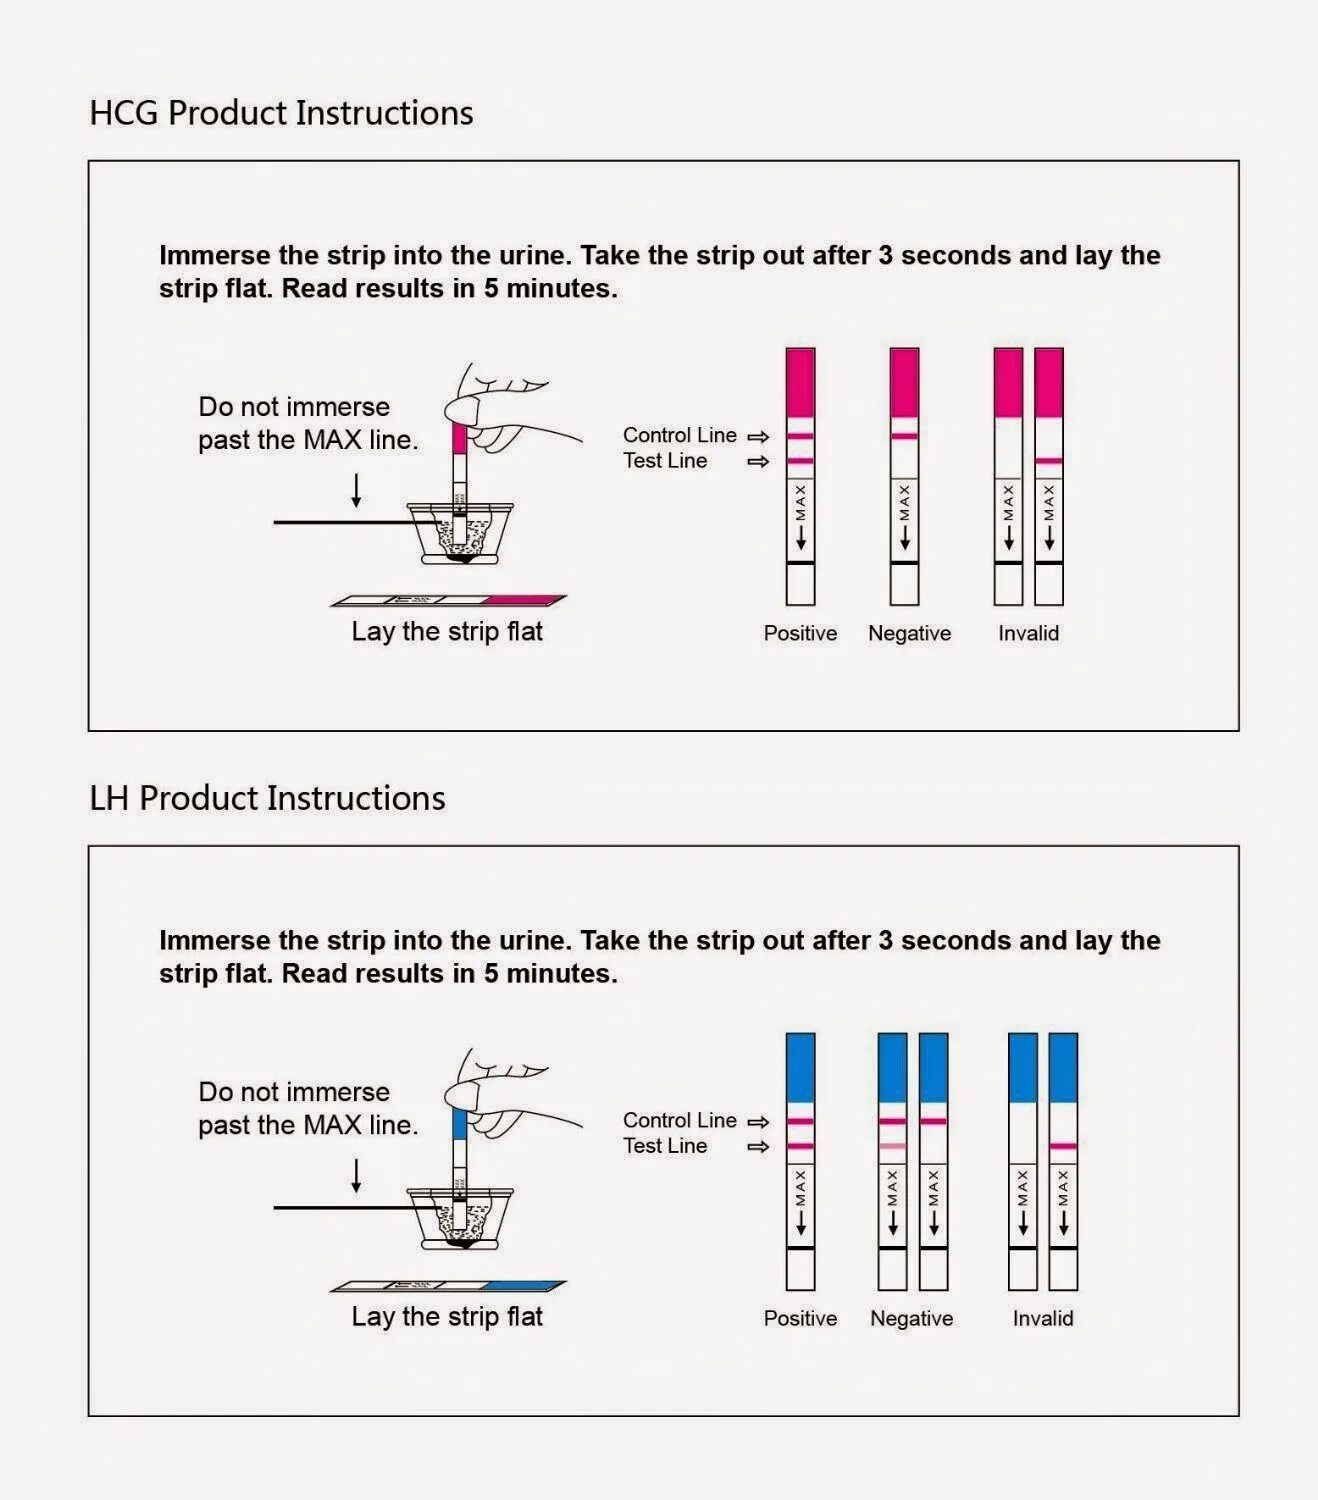 Product instruction. Product instructions. HCG тест. LH Ovulation Test strip HCG pregnancy Test strip инструкция. Test strips инструкция.